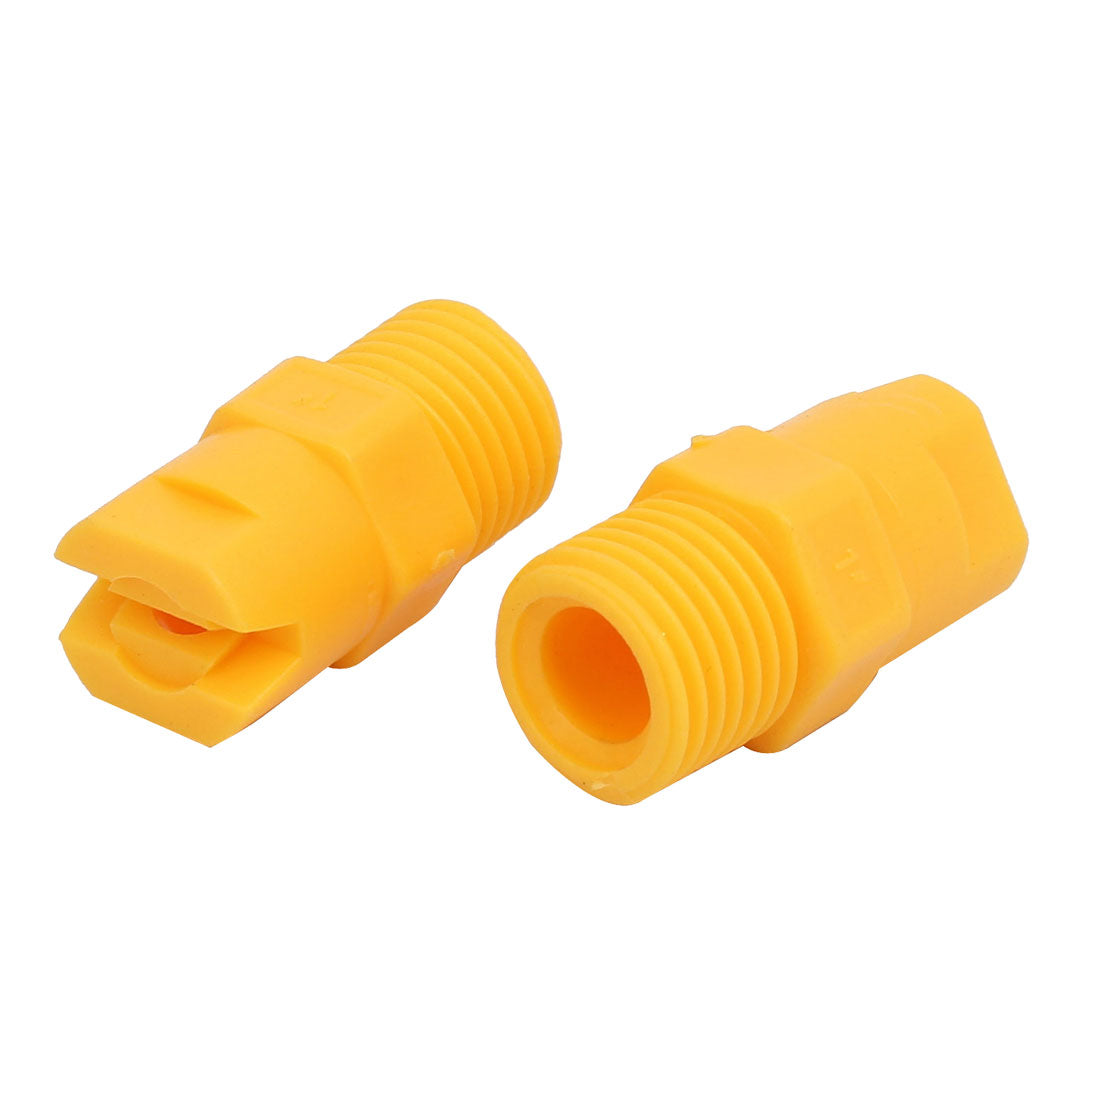 uxcell Uxcell 1/4PT Male Inlet 85 Degree Standard Flat Fan Spray Tip Yellow 5pcs